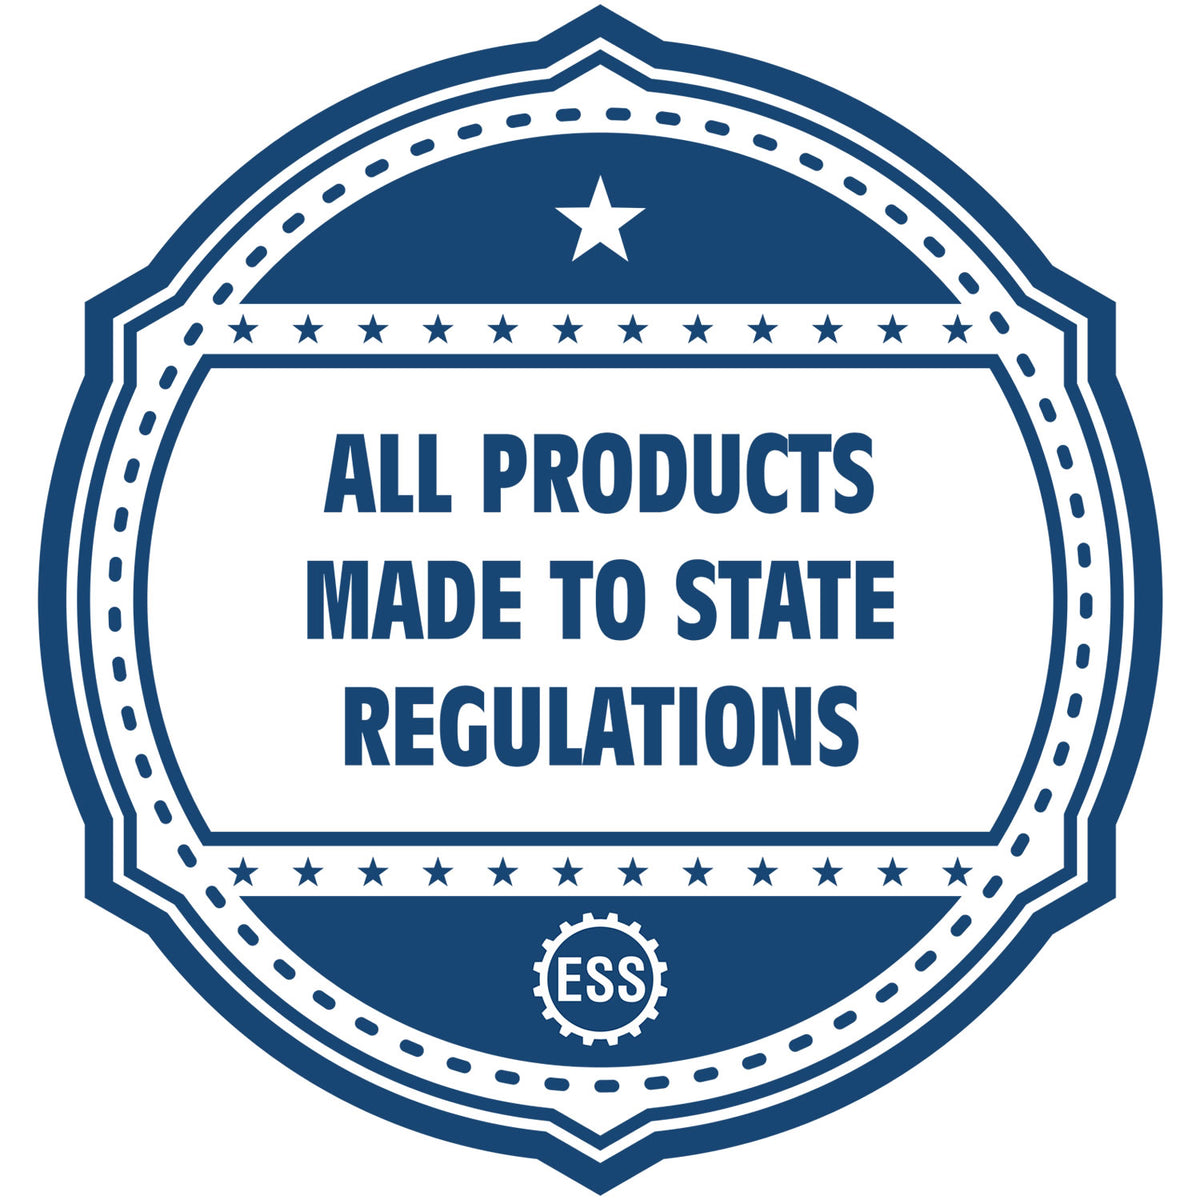 An icon or badge element for the Soft New York Professional Engineer Seal showing that this product is made in compliance with state regulations.